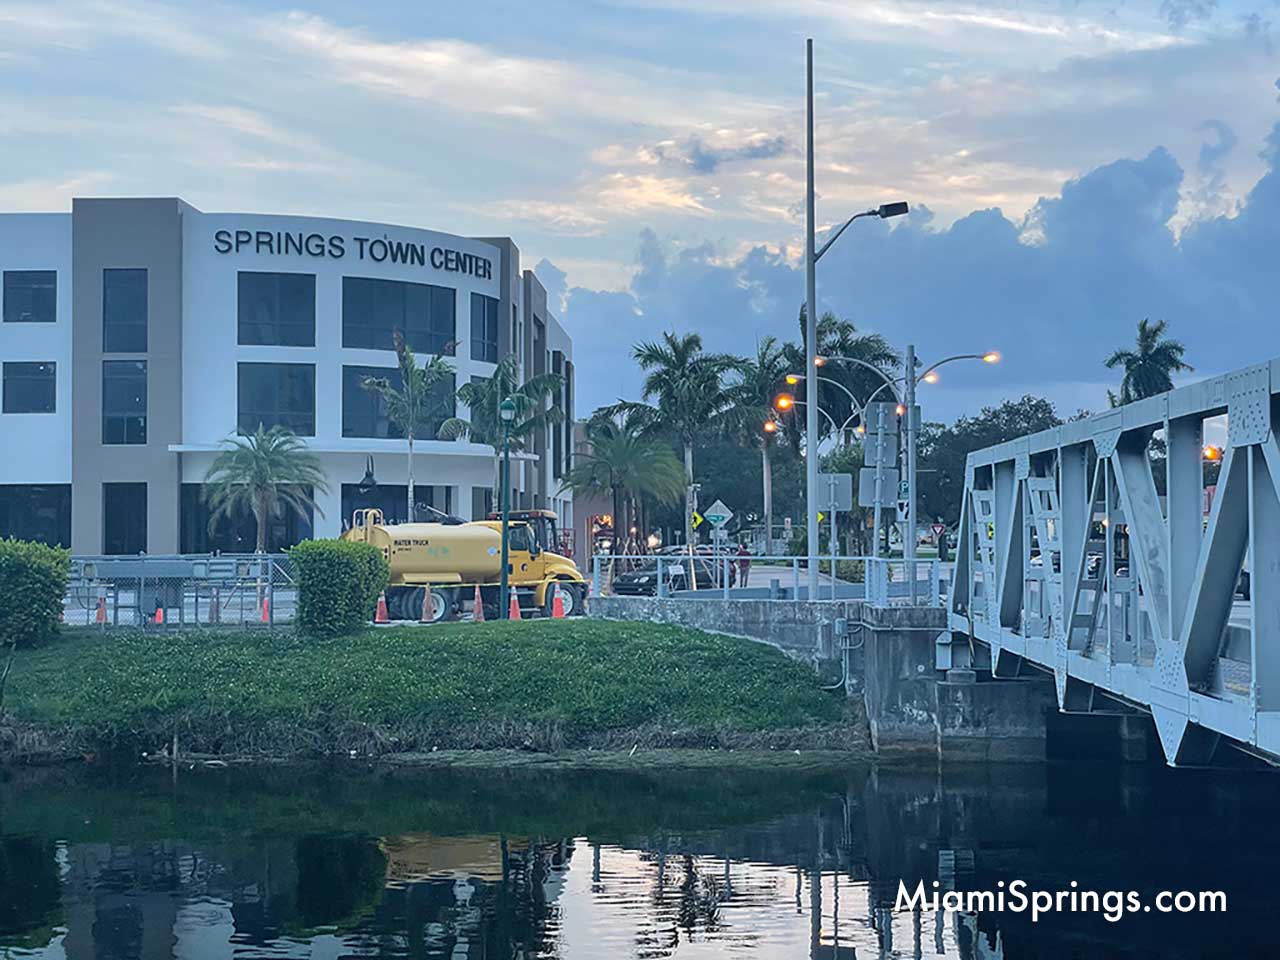 Miami Springs Town Center at One Curtiss Parkway, Miami Springs, Florida (Photo Credit: MiamiSprings.com)